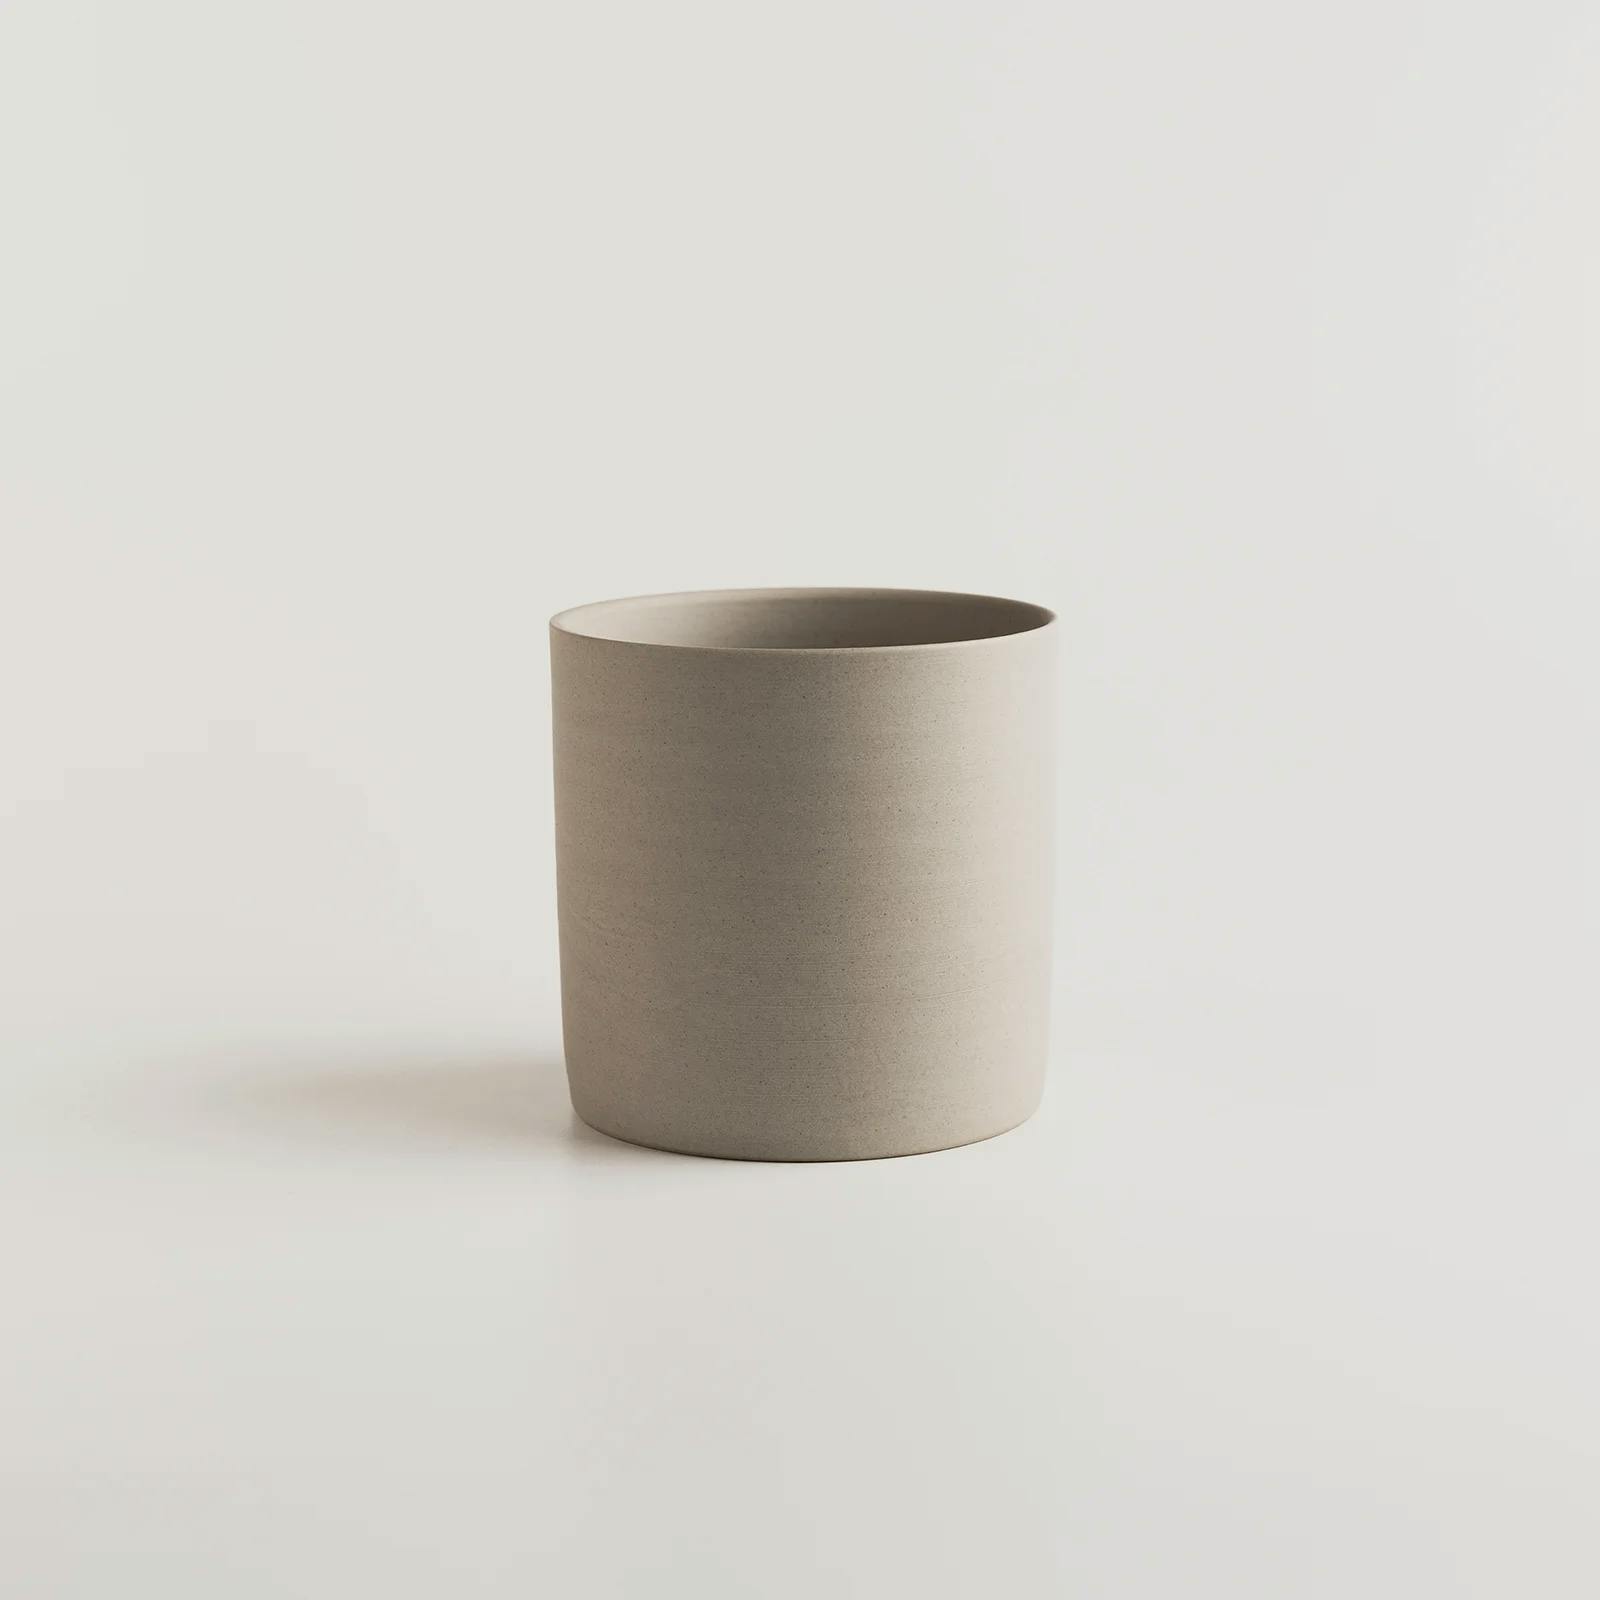 Image of Nankei cylinder cups in natural color